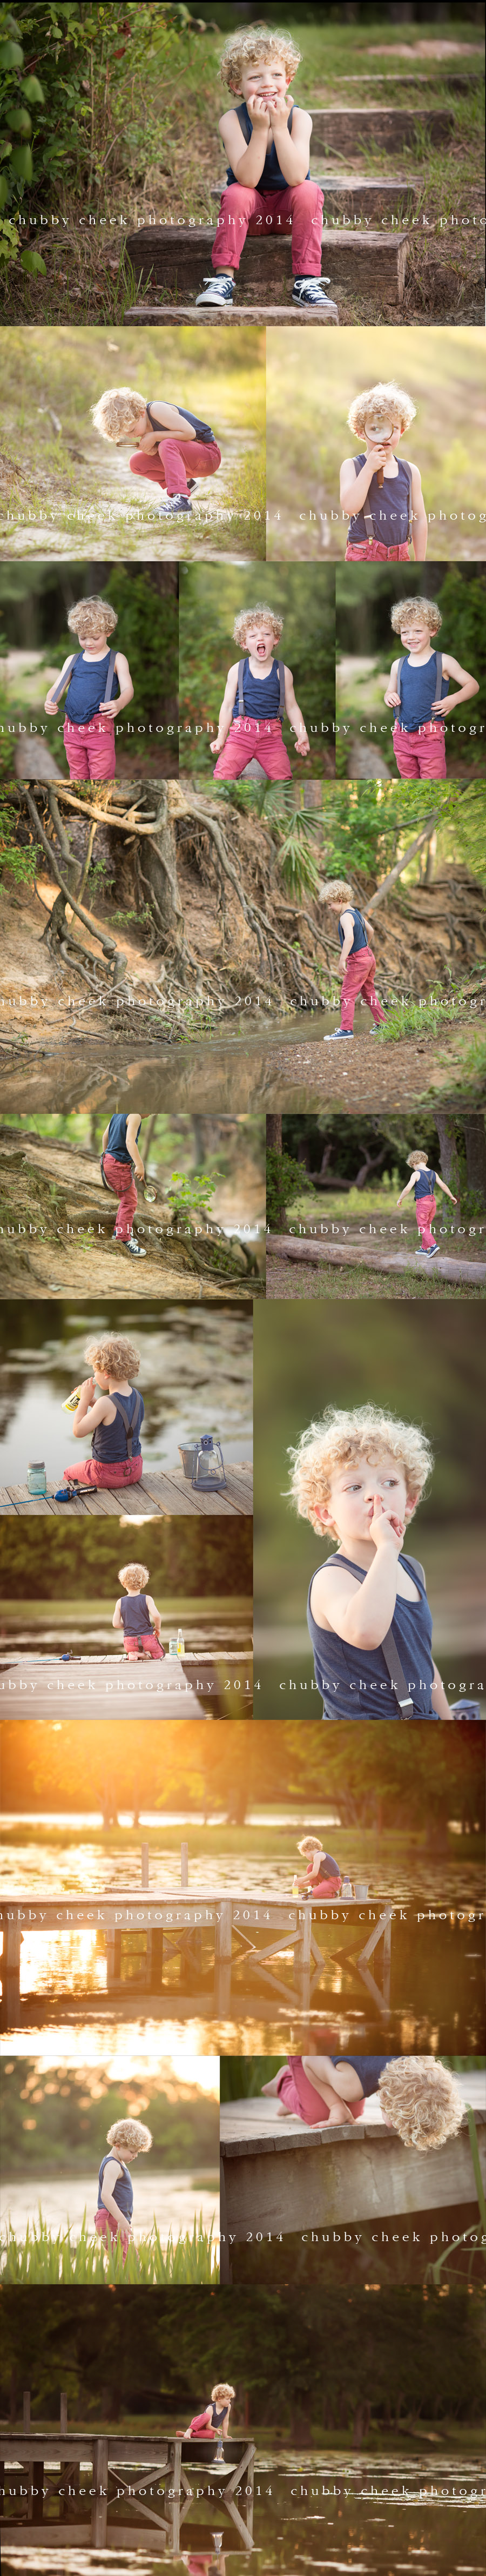 © chubby cheek photography the woodlands tx